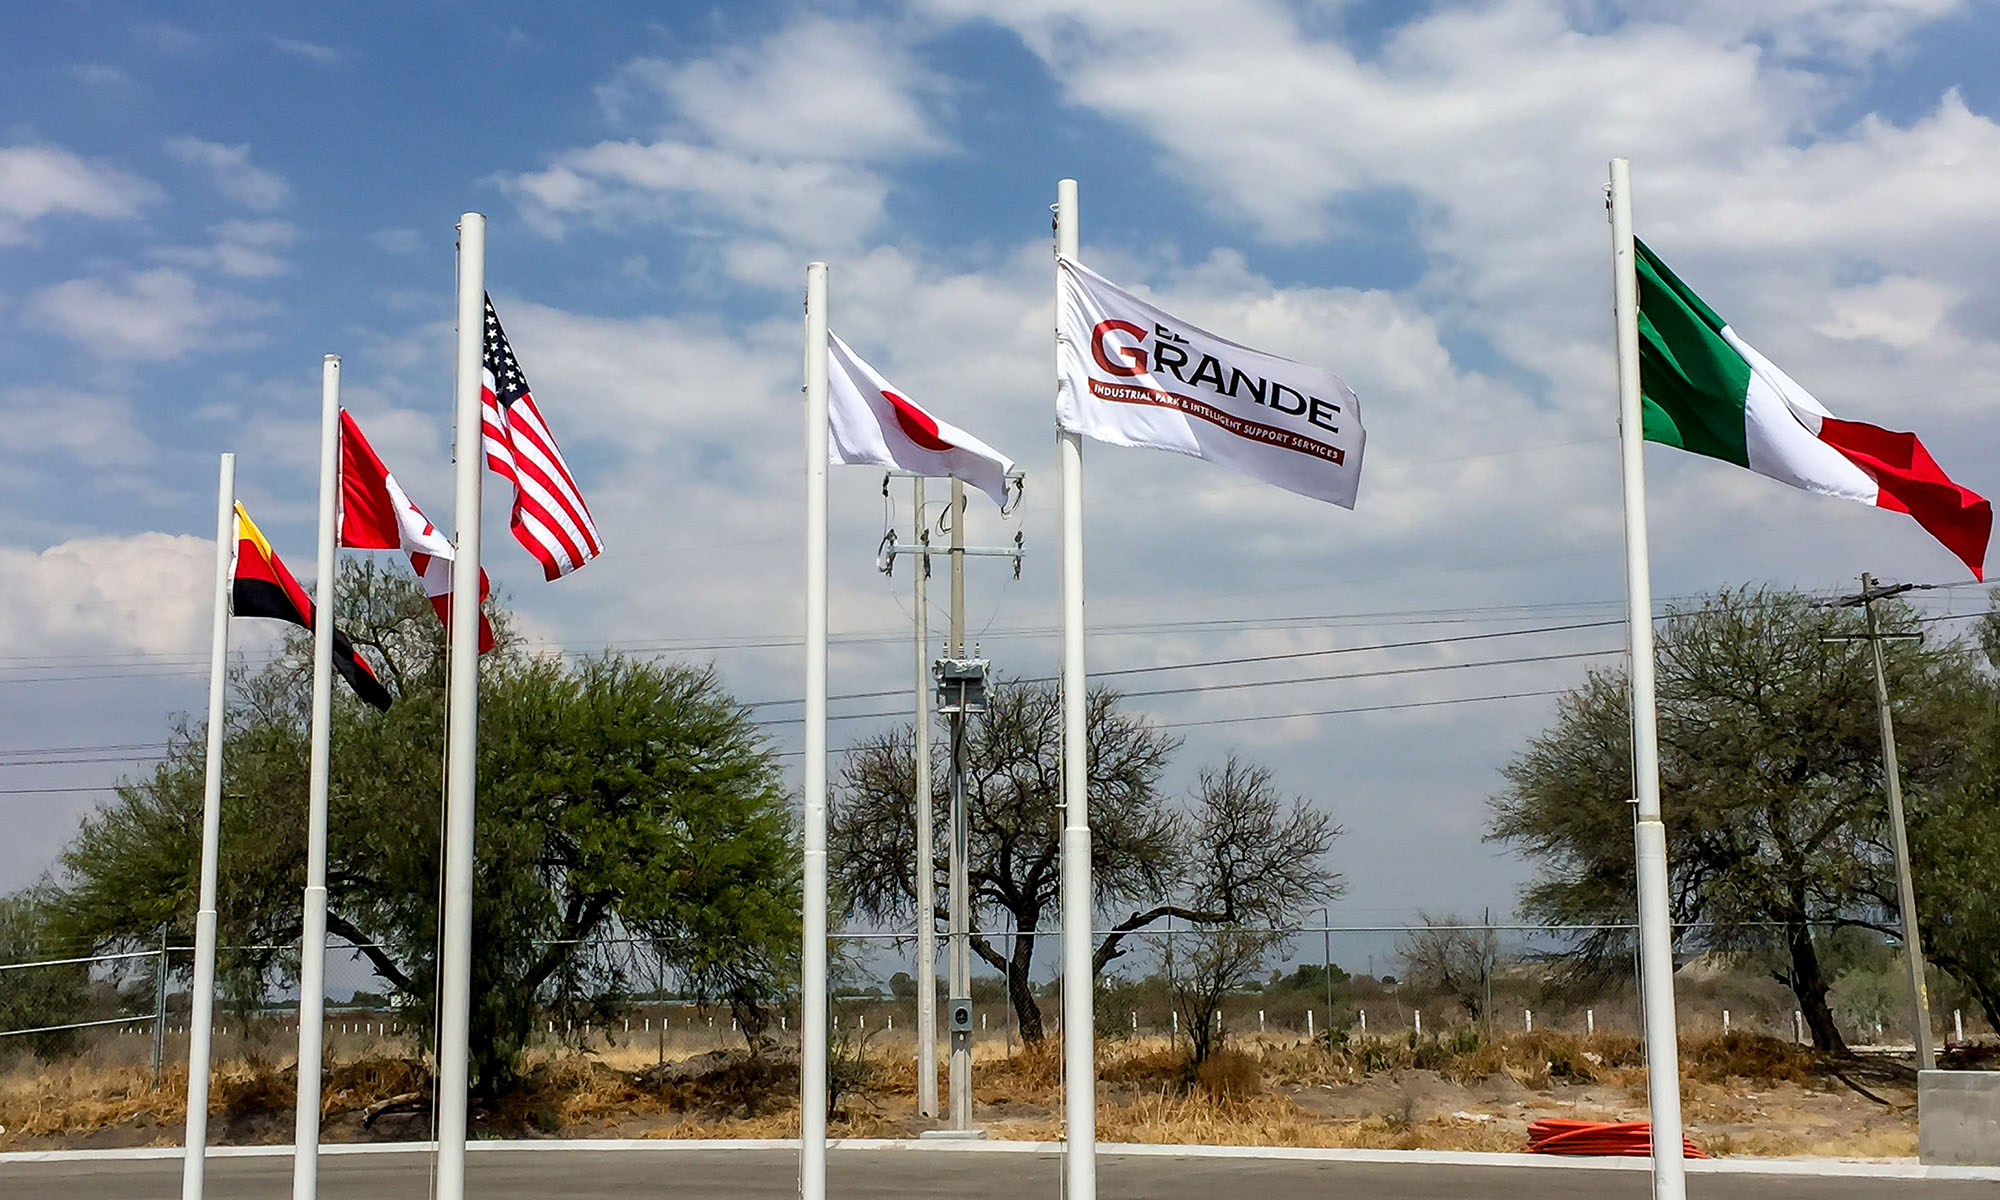 Industrial parks throughout Guanajuato and Querétaro are designed to help foreign investors start doing business in Mexico. Marco Pardo and his team at this new industrial park in a small town in Guanajuato hope to do business with countries from all over. 